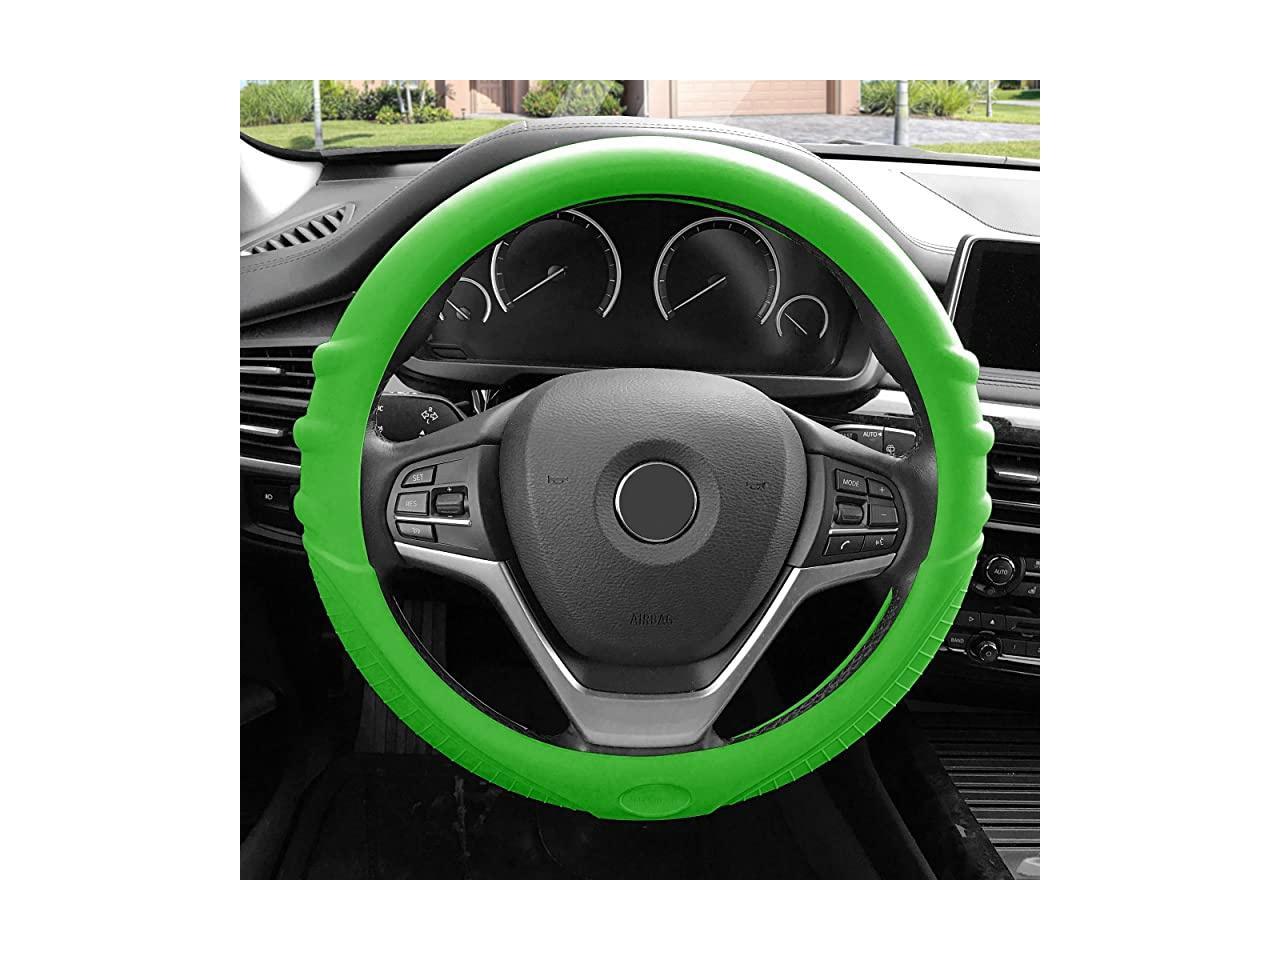 FH Group FH3003GREEN Green Steering Wheel Cover Silicone W. Grip & Pattern Massaging Grip Green Color-Fit Most Car Truck SUV or Van